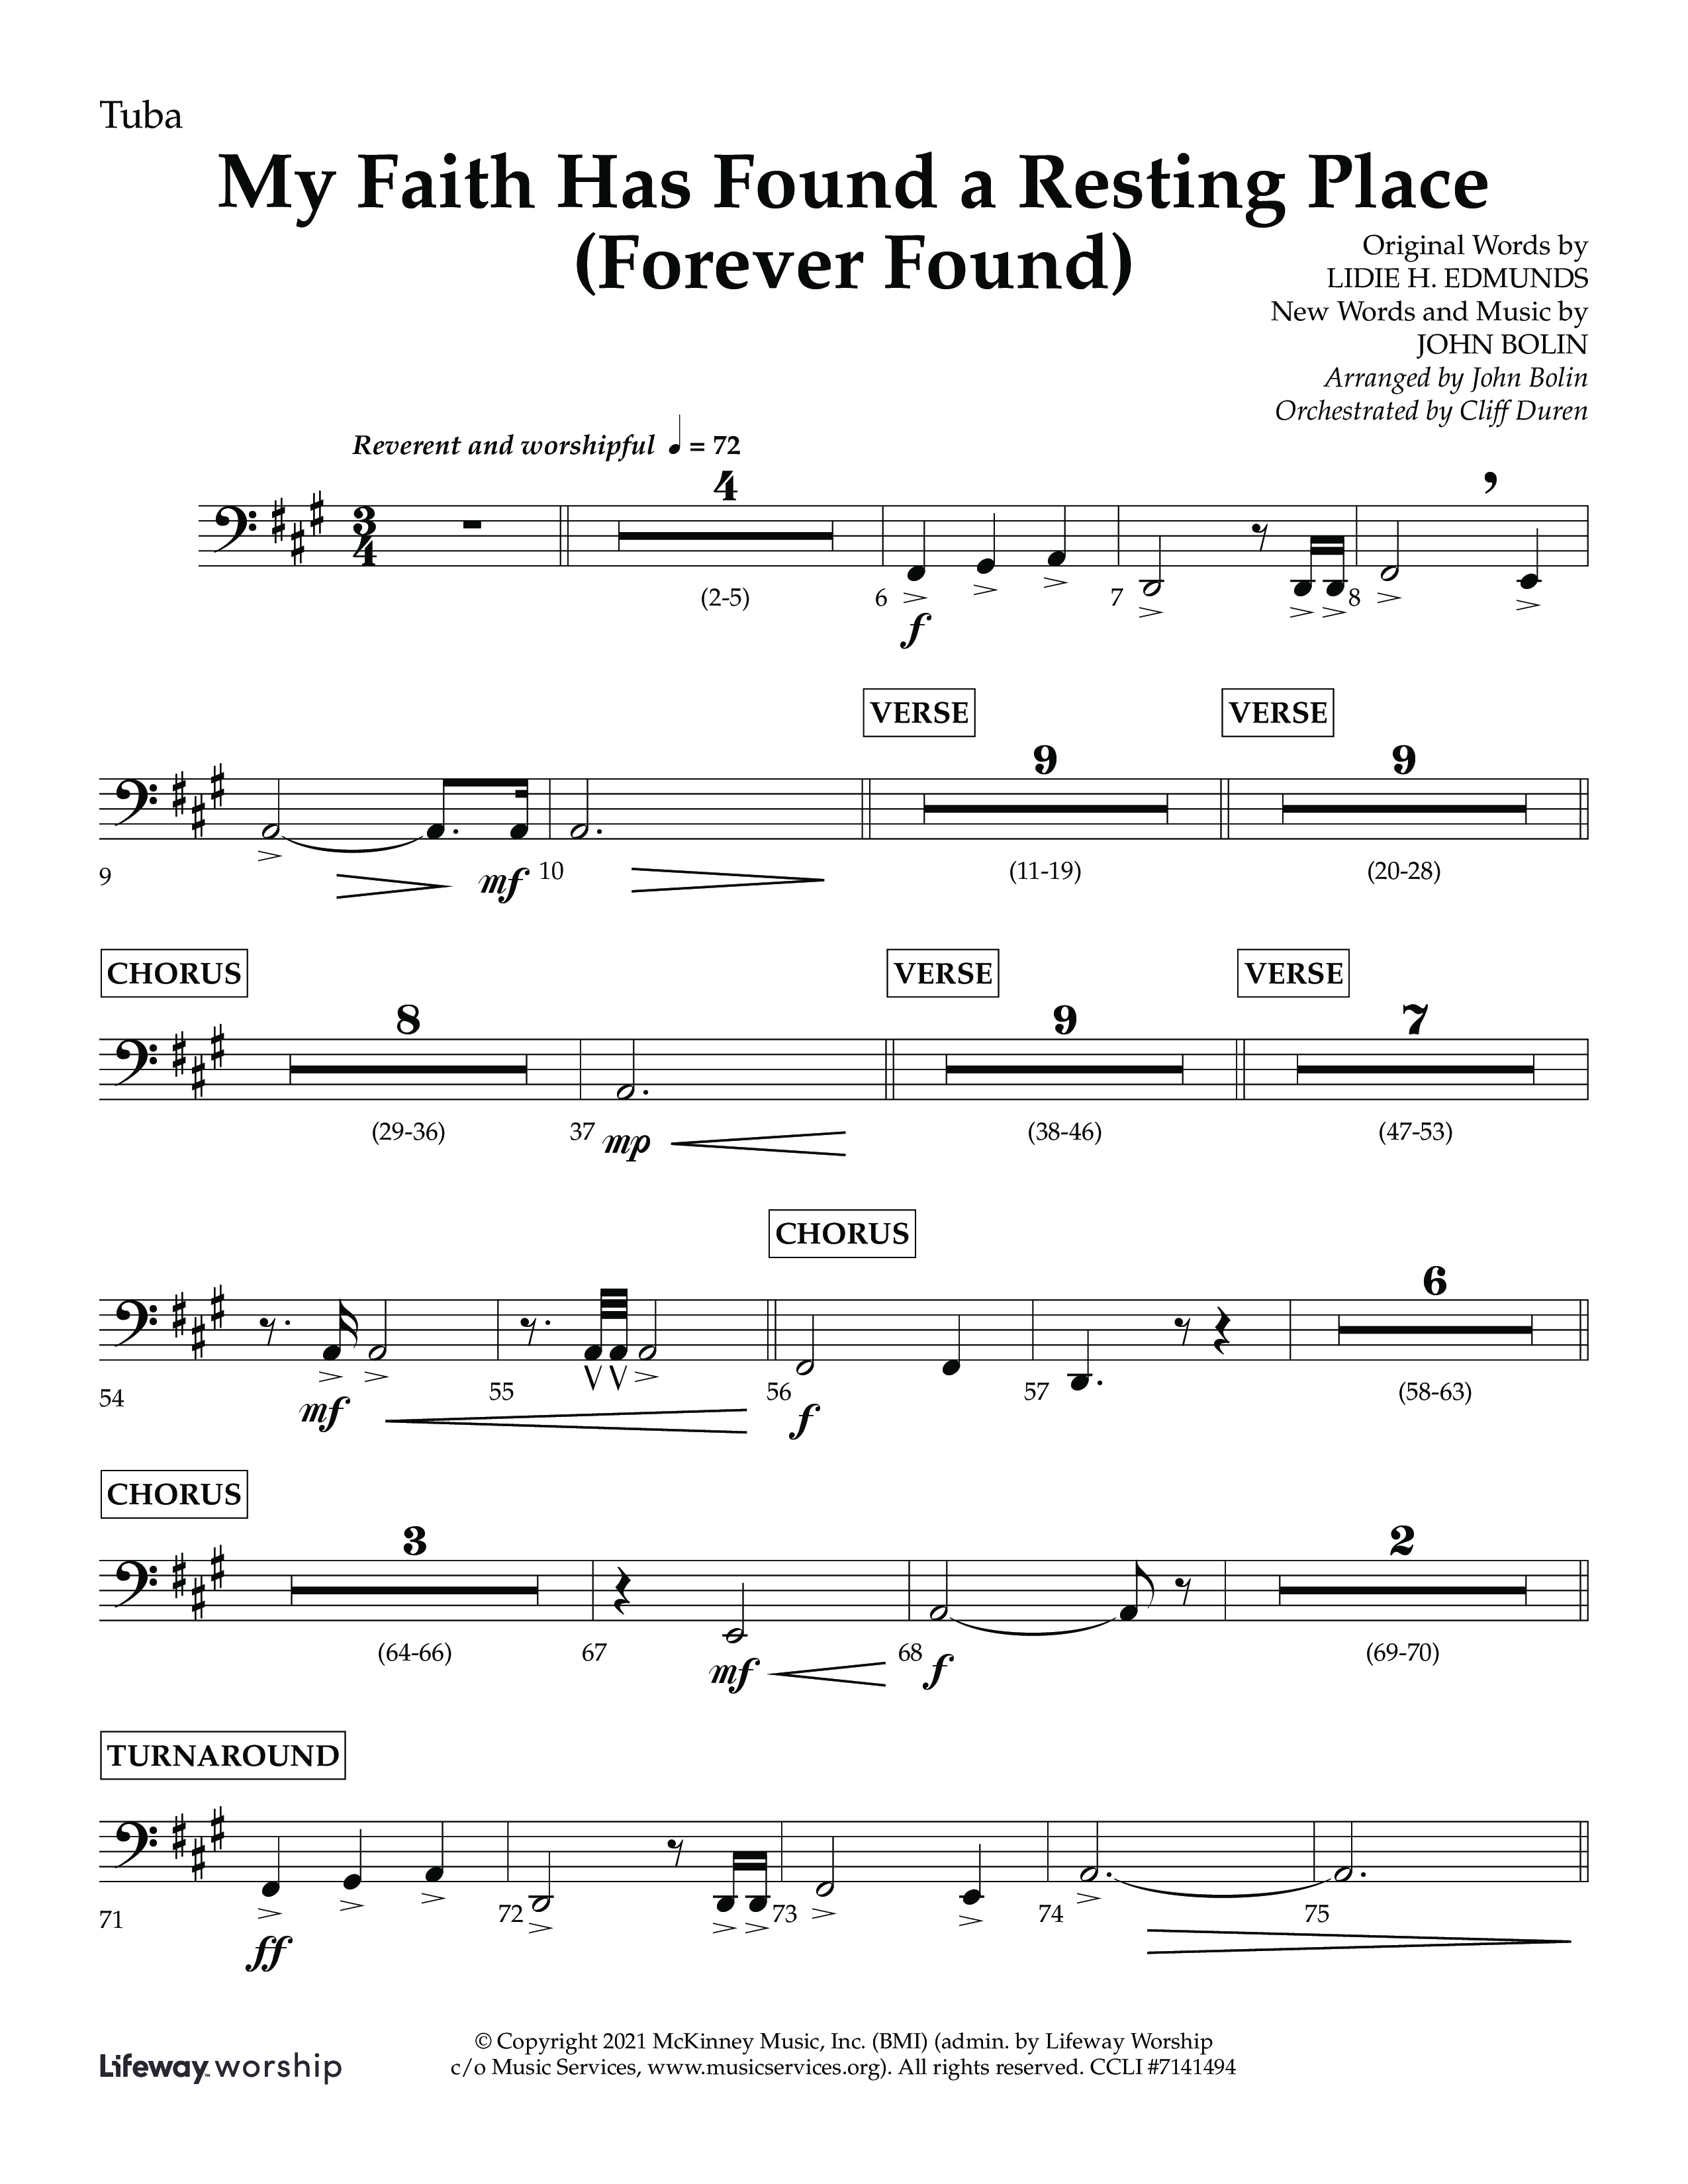 My Faith Has Found a Resting Place (Forever Found) (Choral Anthem SATB) Tuba (Lifeway Choral / Arr. John Bolin / Orch. Cliff Duren)